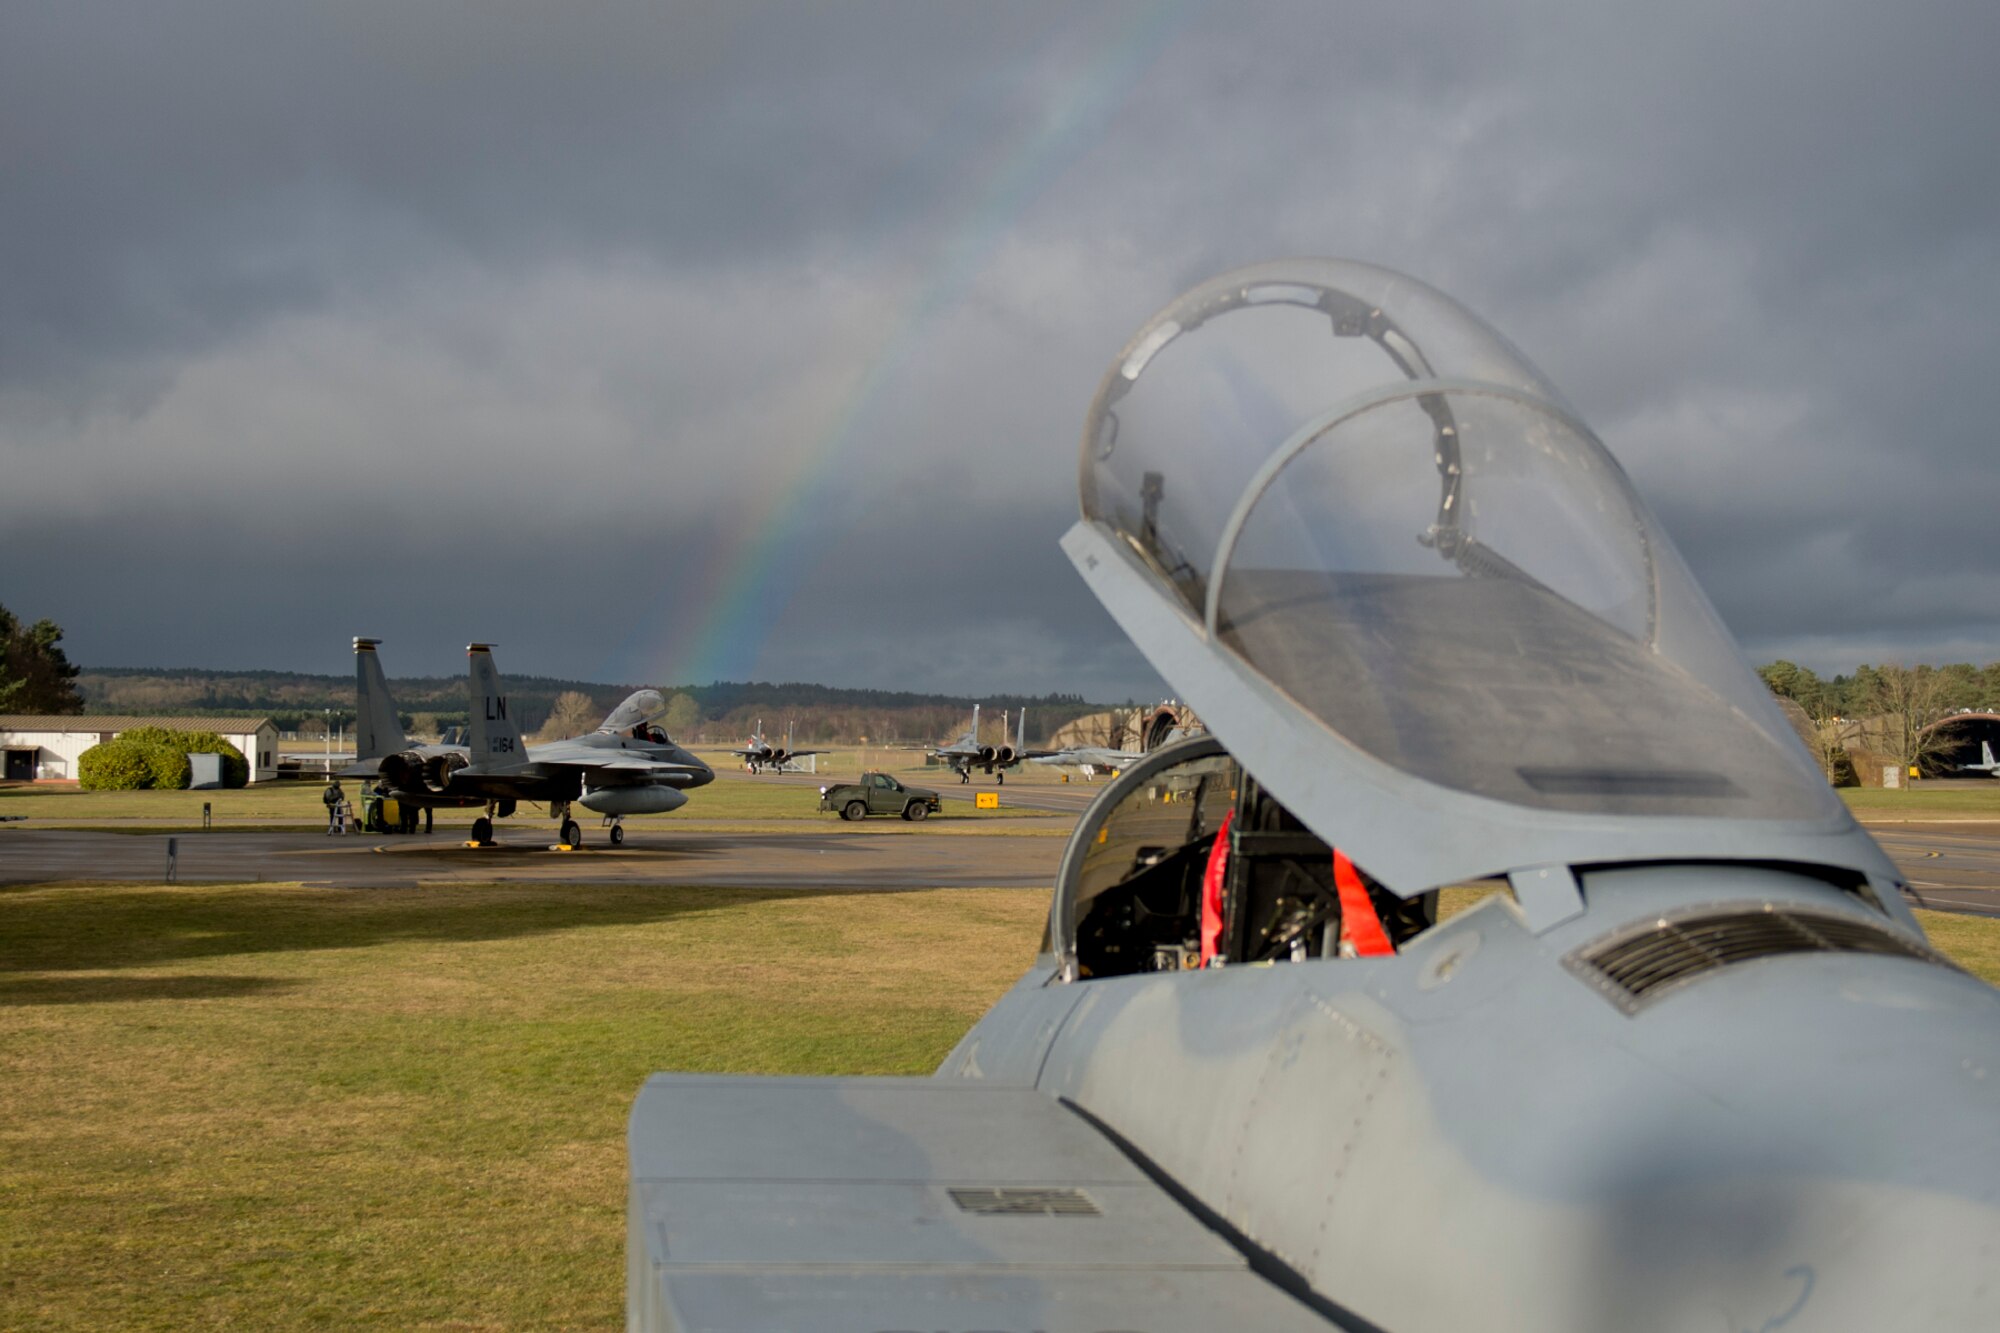 F-15C Eagles from the 493rd Fighter Squadron rest between sorties at Royal Air Force Lakenheath, March 7, 2016. The 493rd FS is a combat-ready F-15C squadron capable of executing air superiority and air defense missions in support of war plans and contingency operations for U.S. Air Forces in Europe-Air Forces Africa, U.S. European Command and NATO. (U.S. Air Force photo/Airman 1st Class Erin R. Babis)